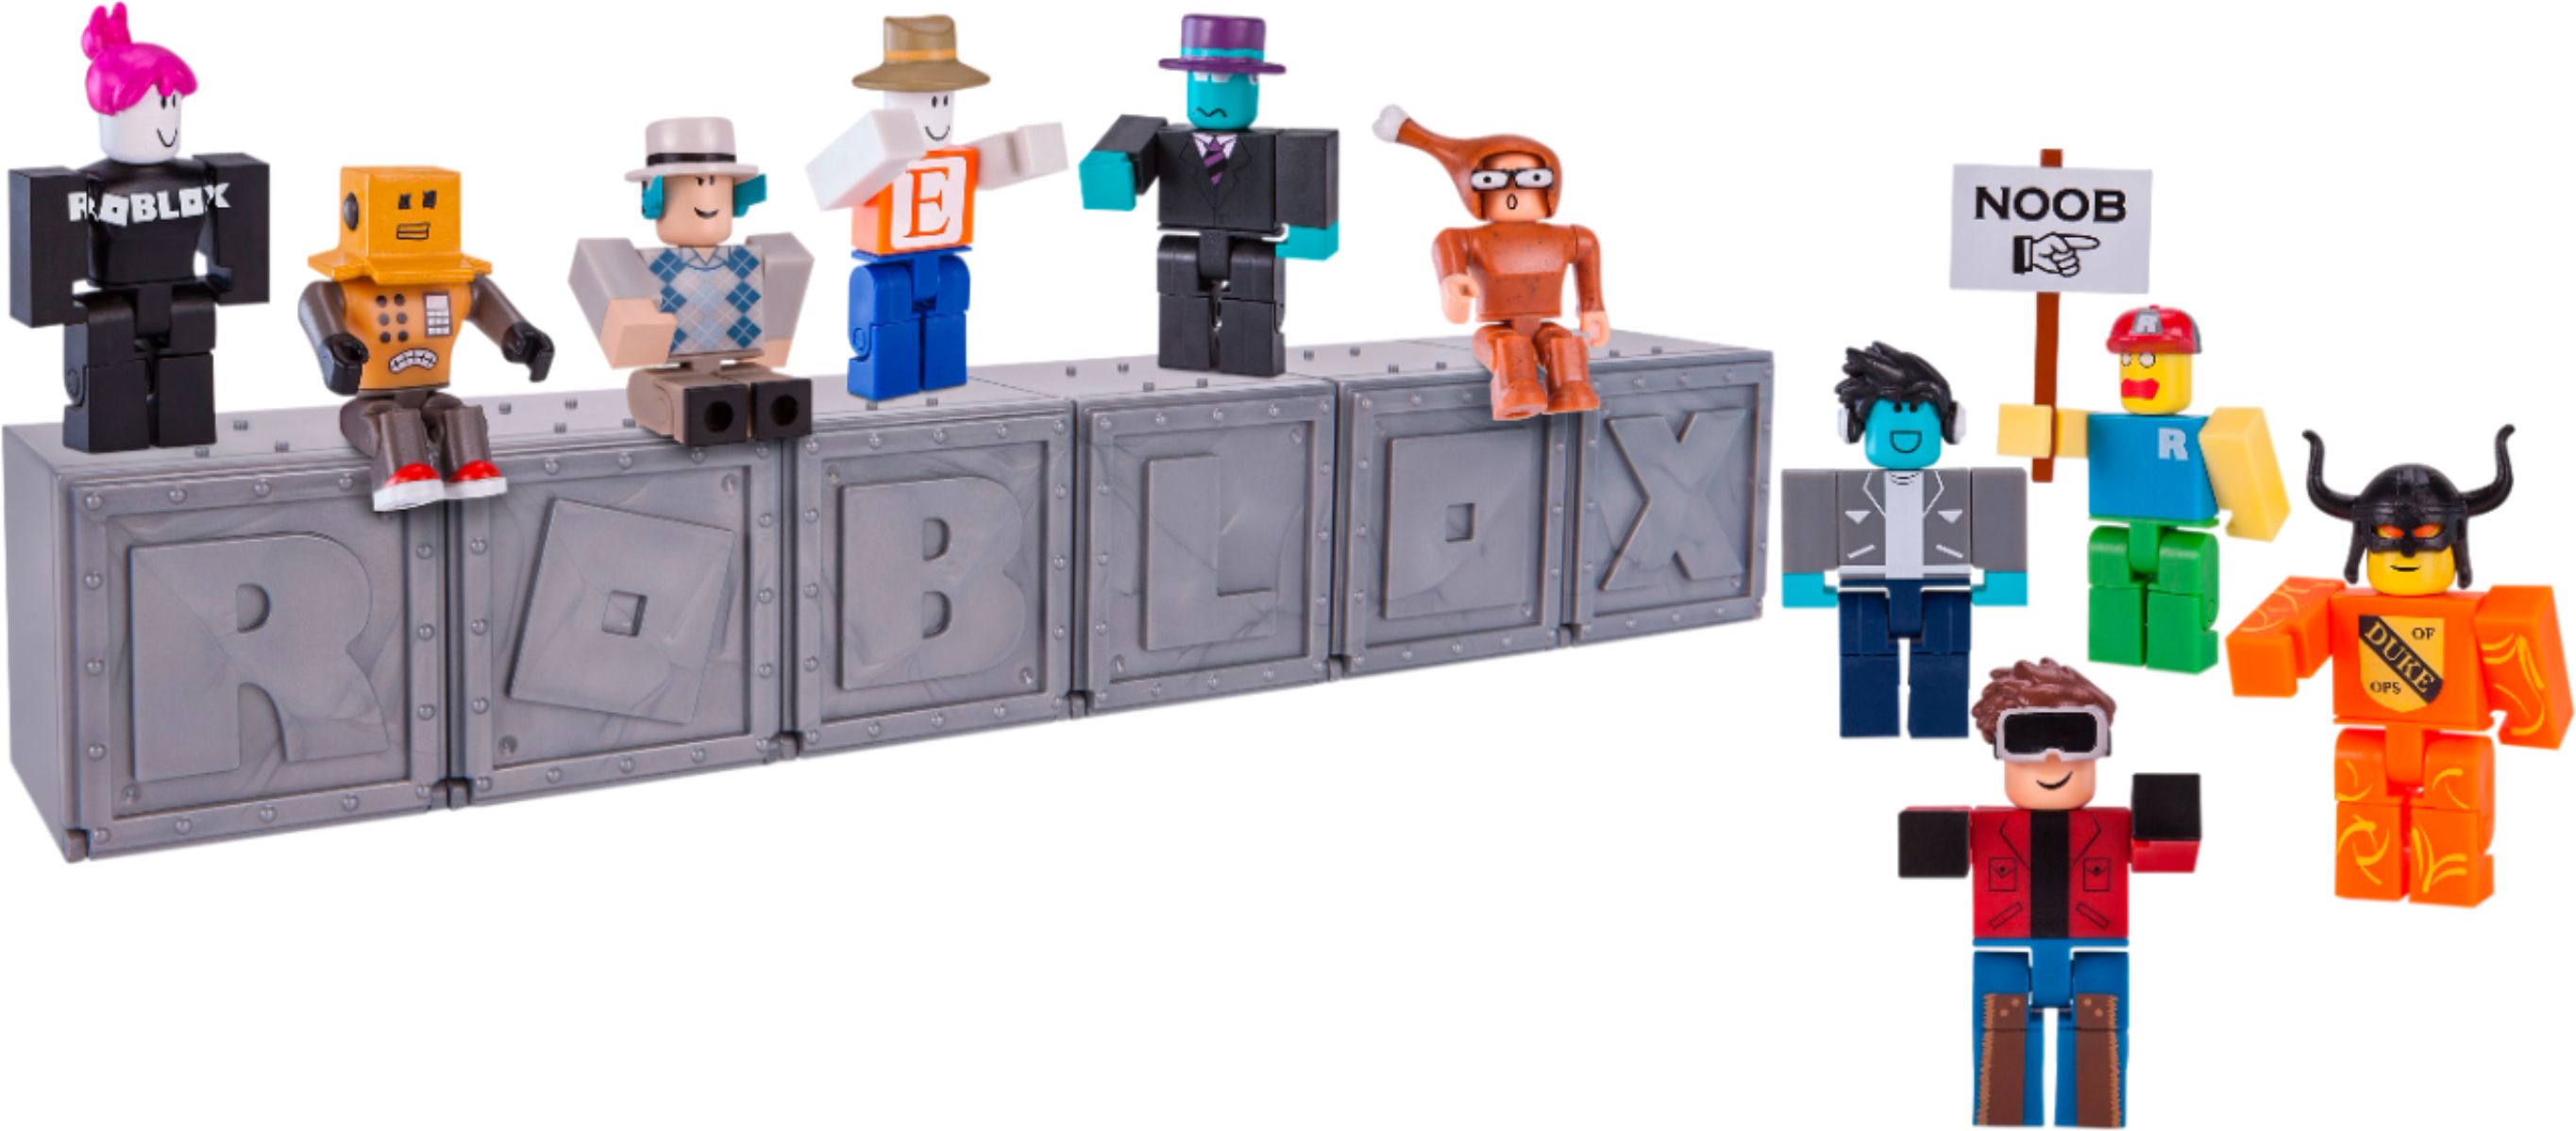 How To Put The Code For The Roblox Toys Visit Rblx Gg